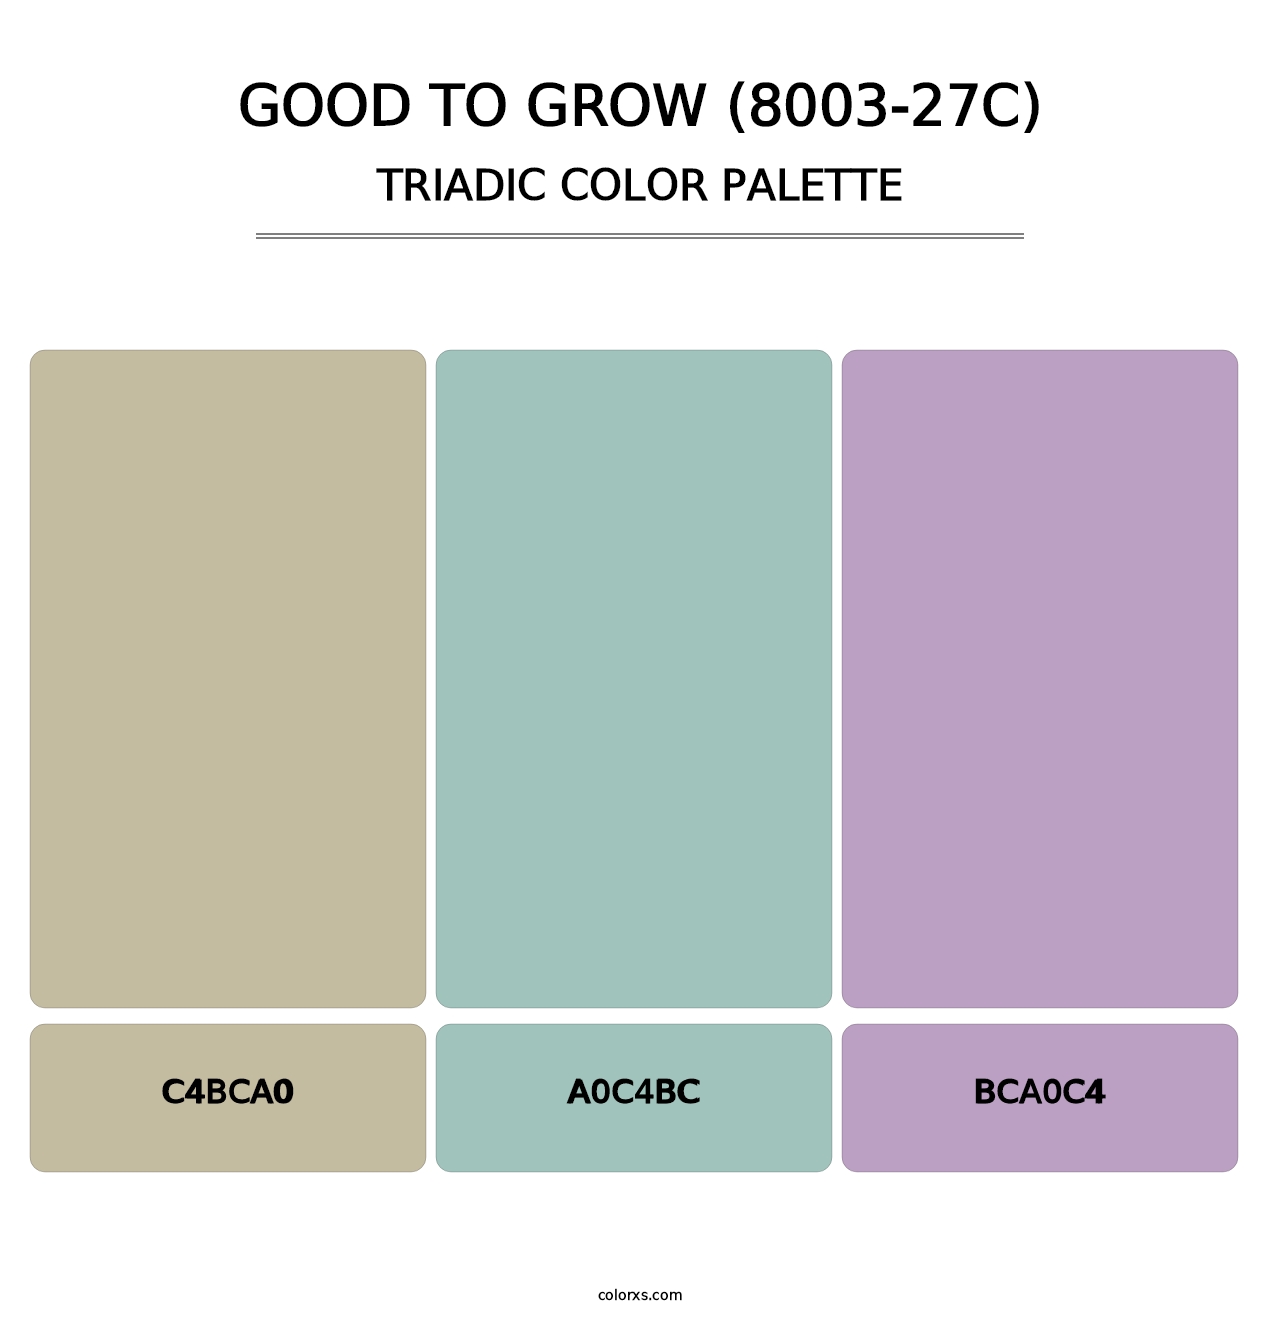 Good to Grow (8003-27C) - Triadic Color Palette